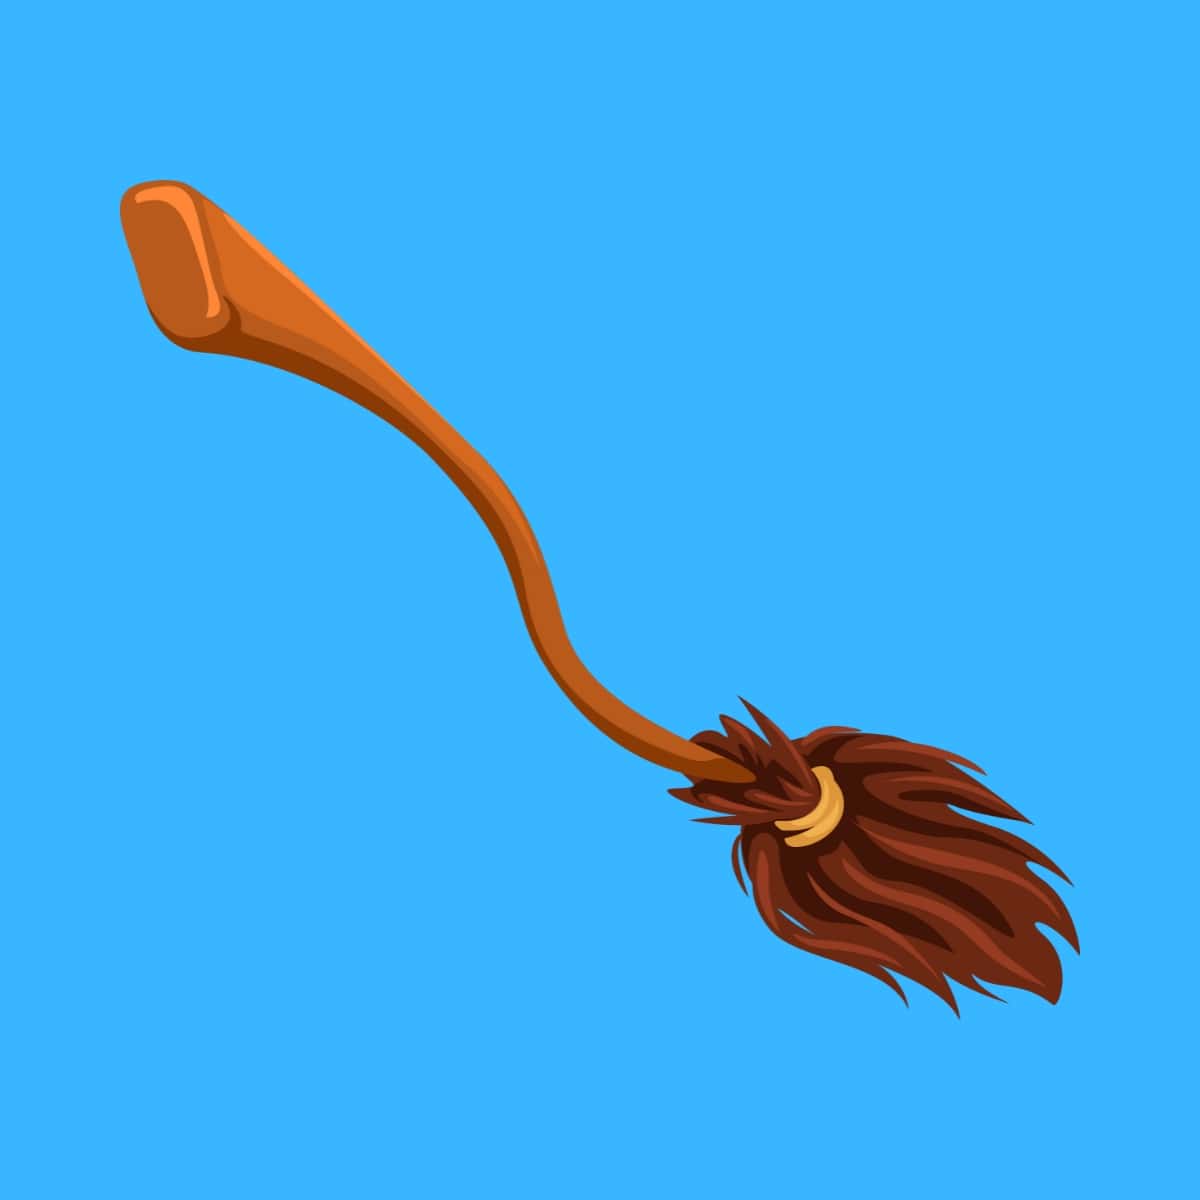 A cartoon graphic of a quidditch broomstick on a blue background.